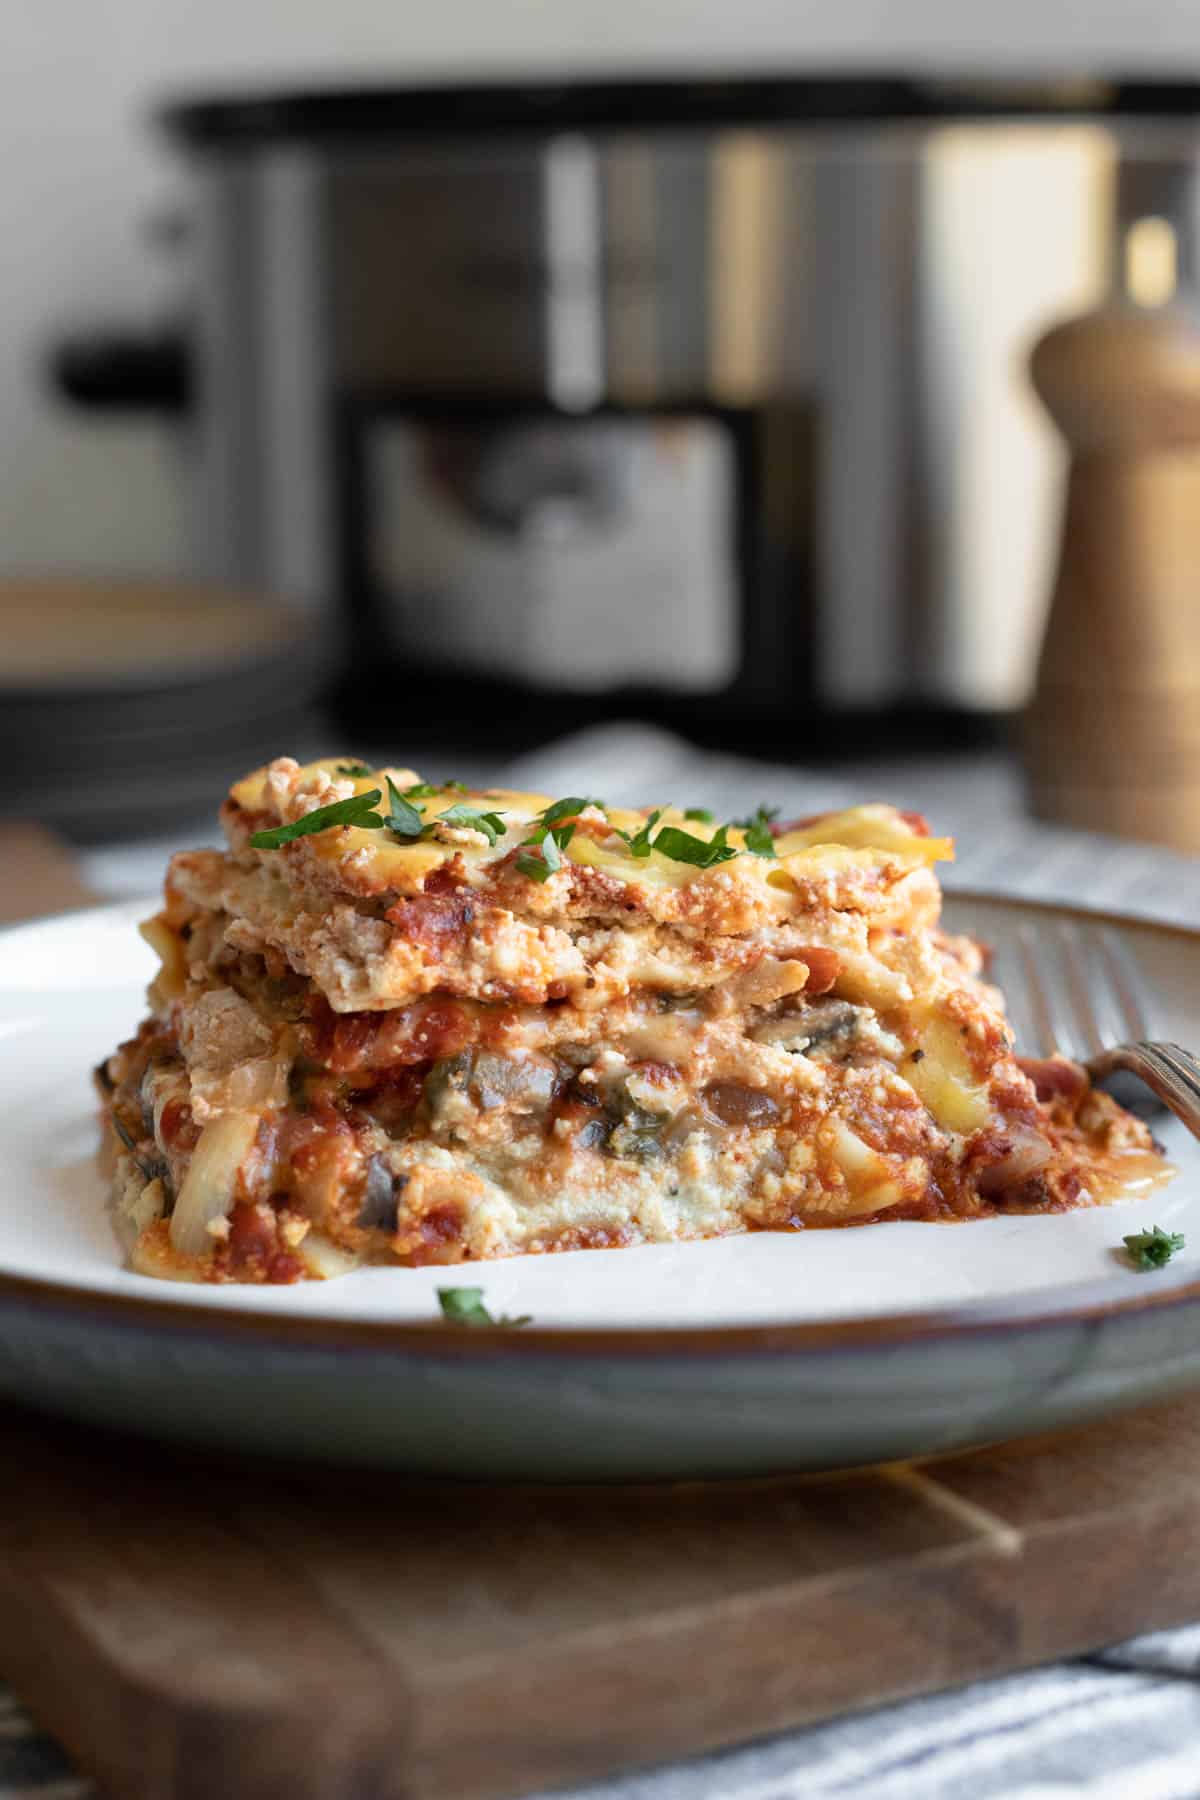 a serving of vegan lasagna on a white plate with crockpot in background.